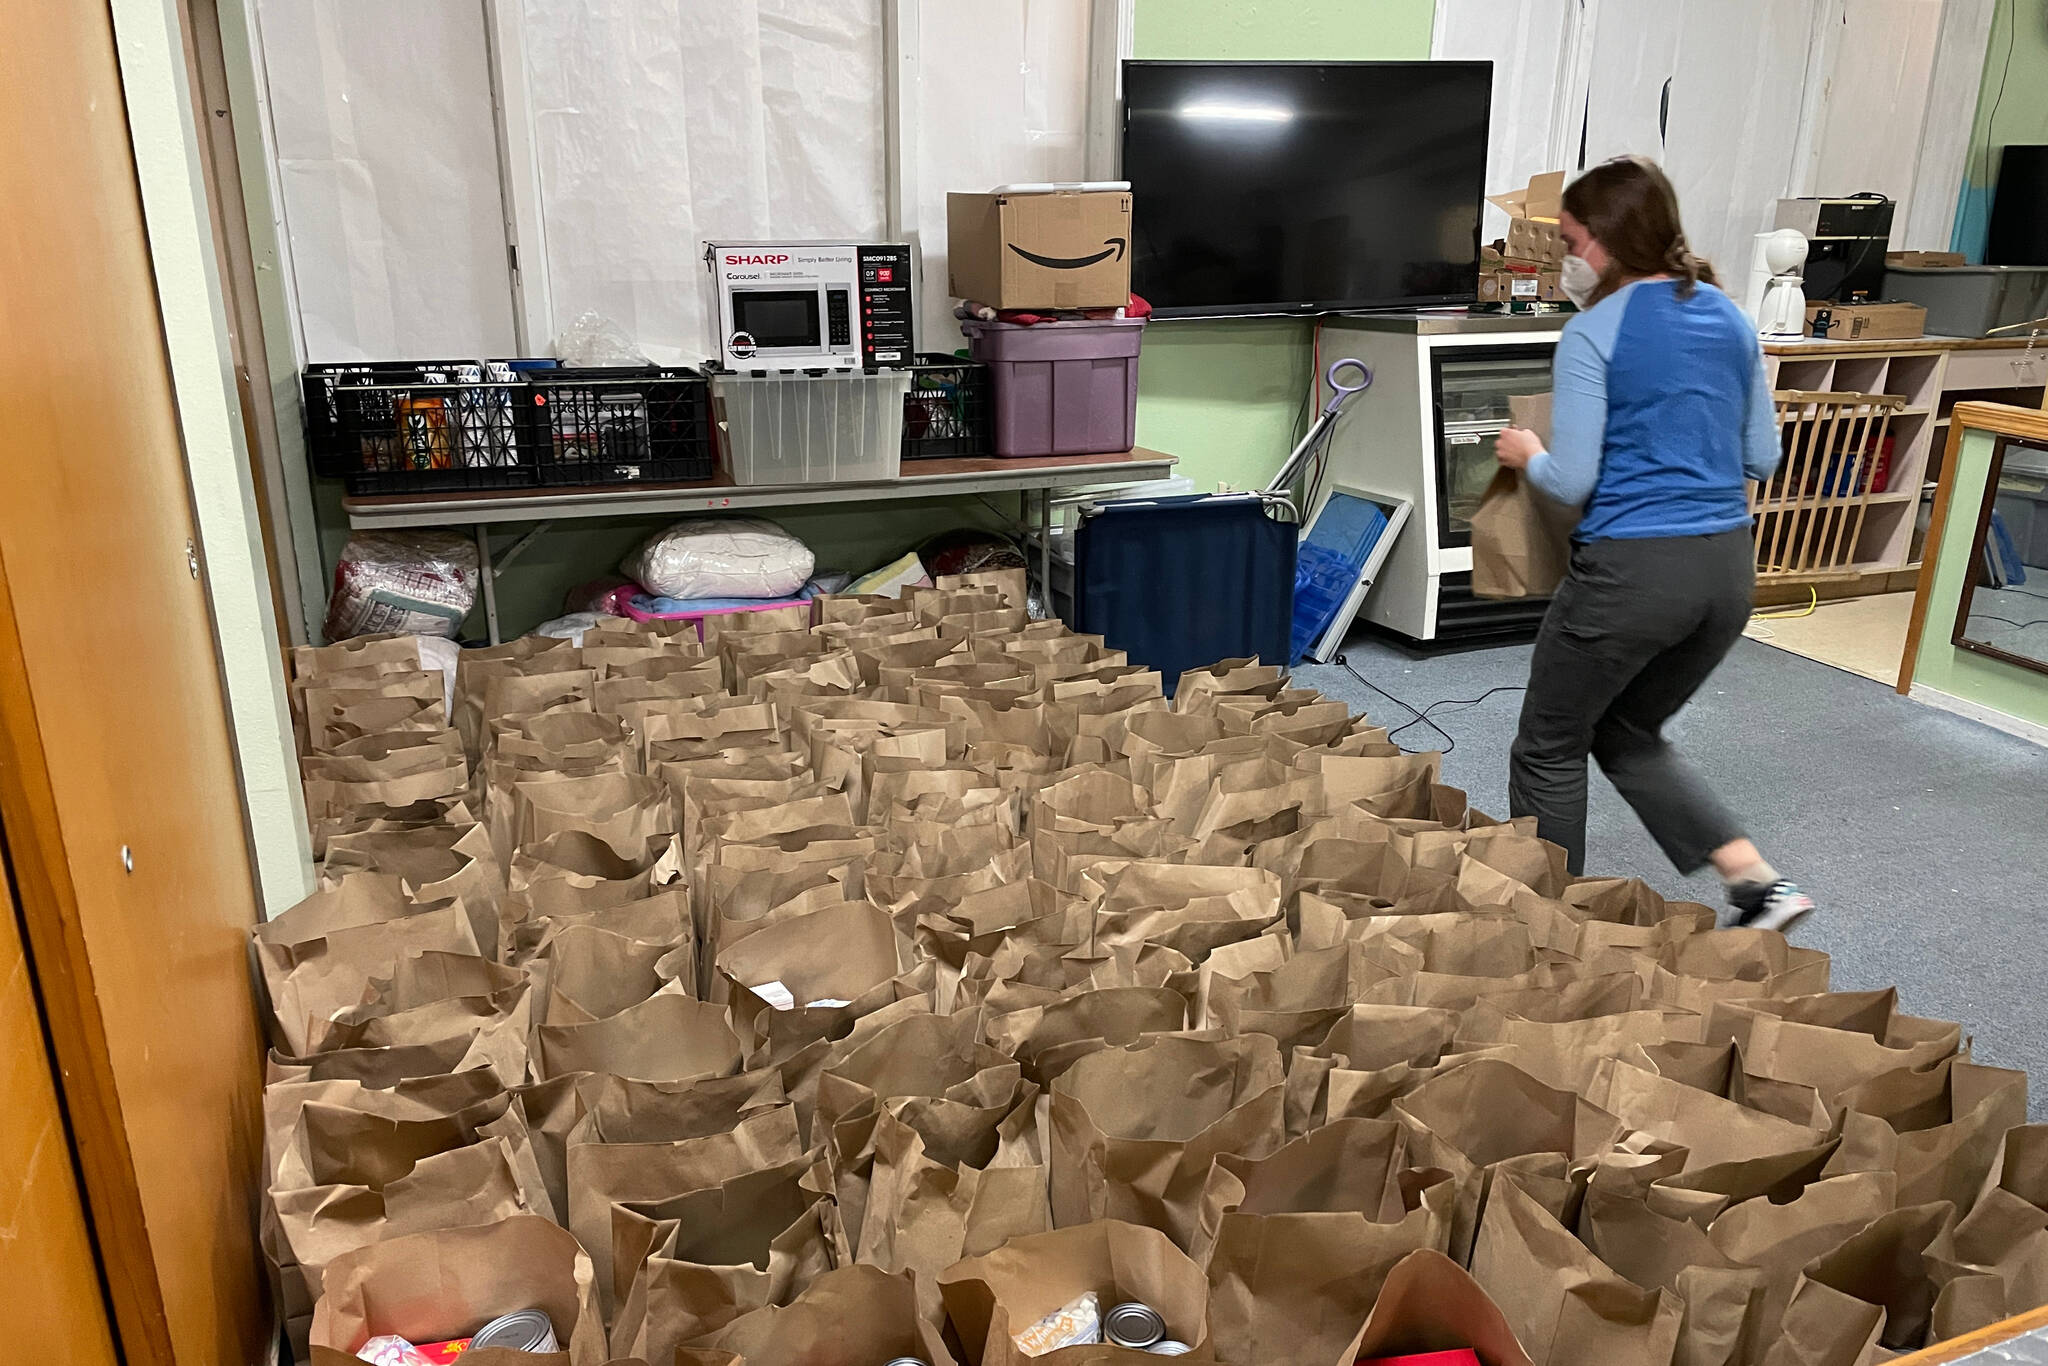 Michael S. Lockett / Juneau Empire
Grace Sikes from the Thunder Mountain High School Interact Club places readied food baskets in a row at the Juneau Society of St. Vincent de Paul on Nov. 18.